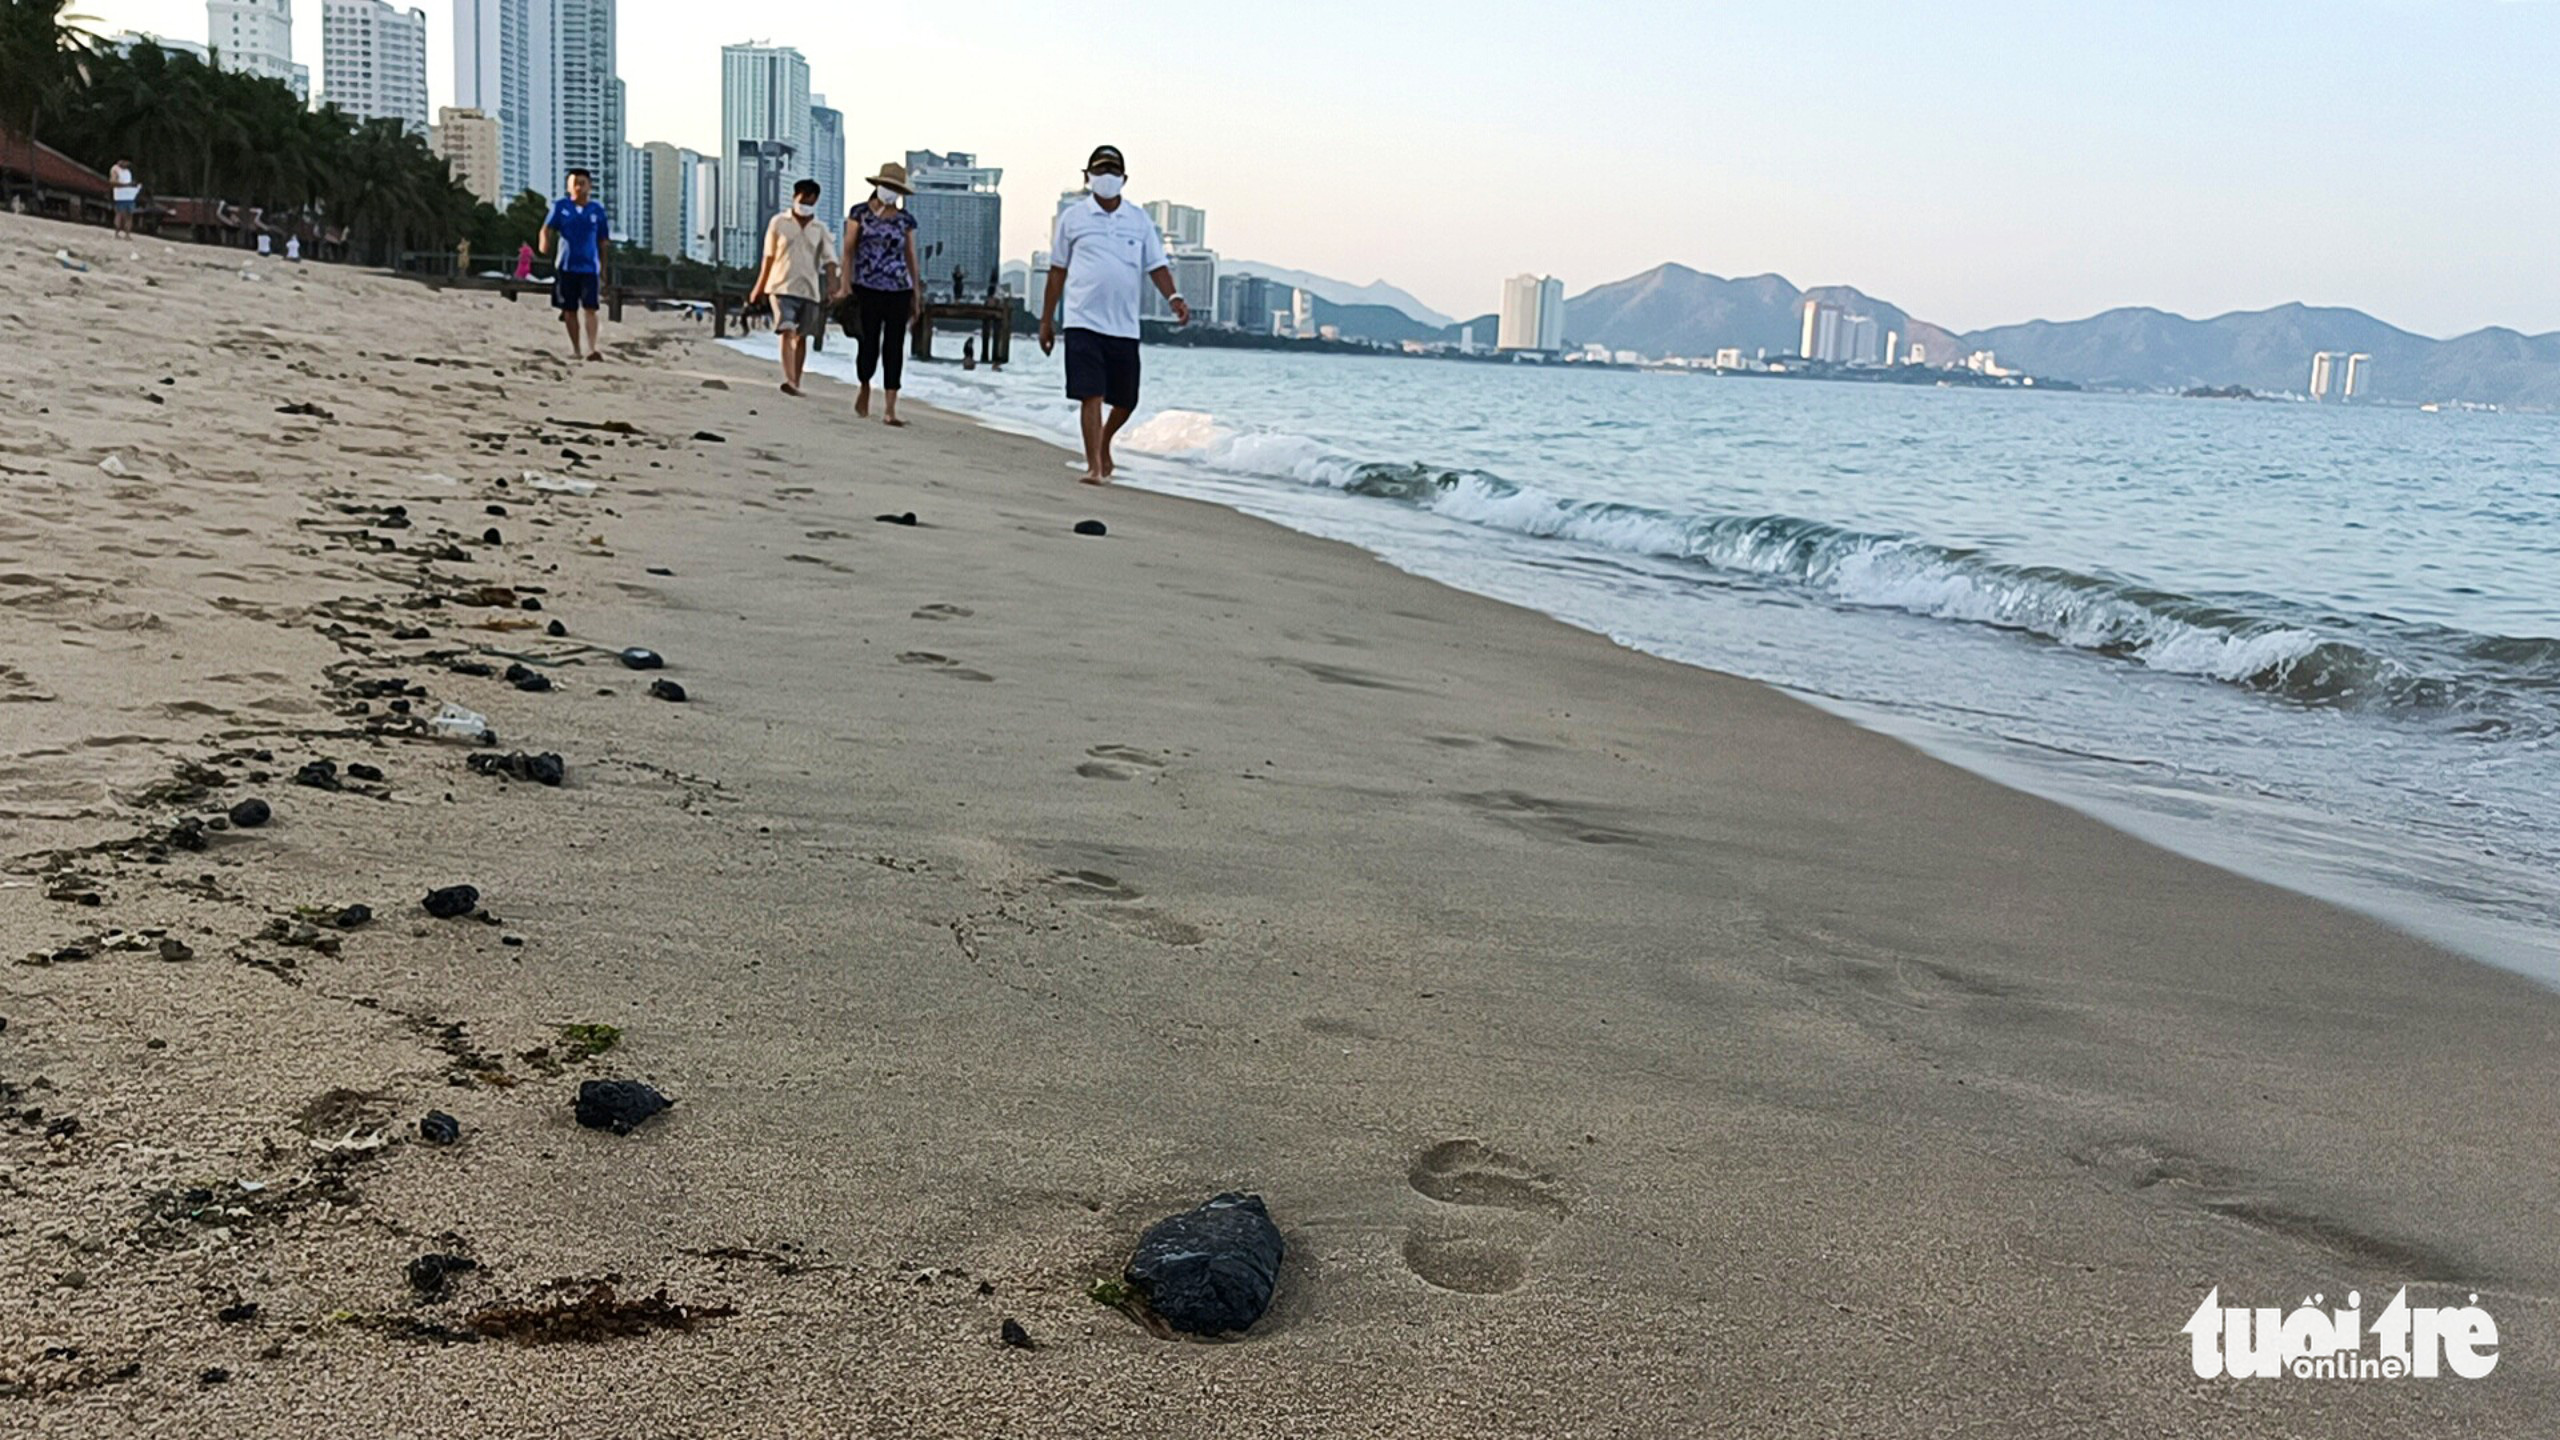 People walk near crude oil masses of unknown origins on a beach in Nha Trang City, Khanh Hoa Province, Vietnam, March 17, 2022. Photo: Minh Chien / Tuoi Tre